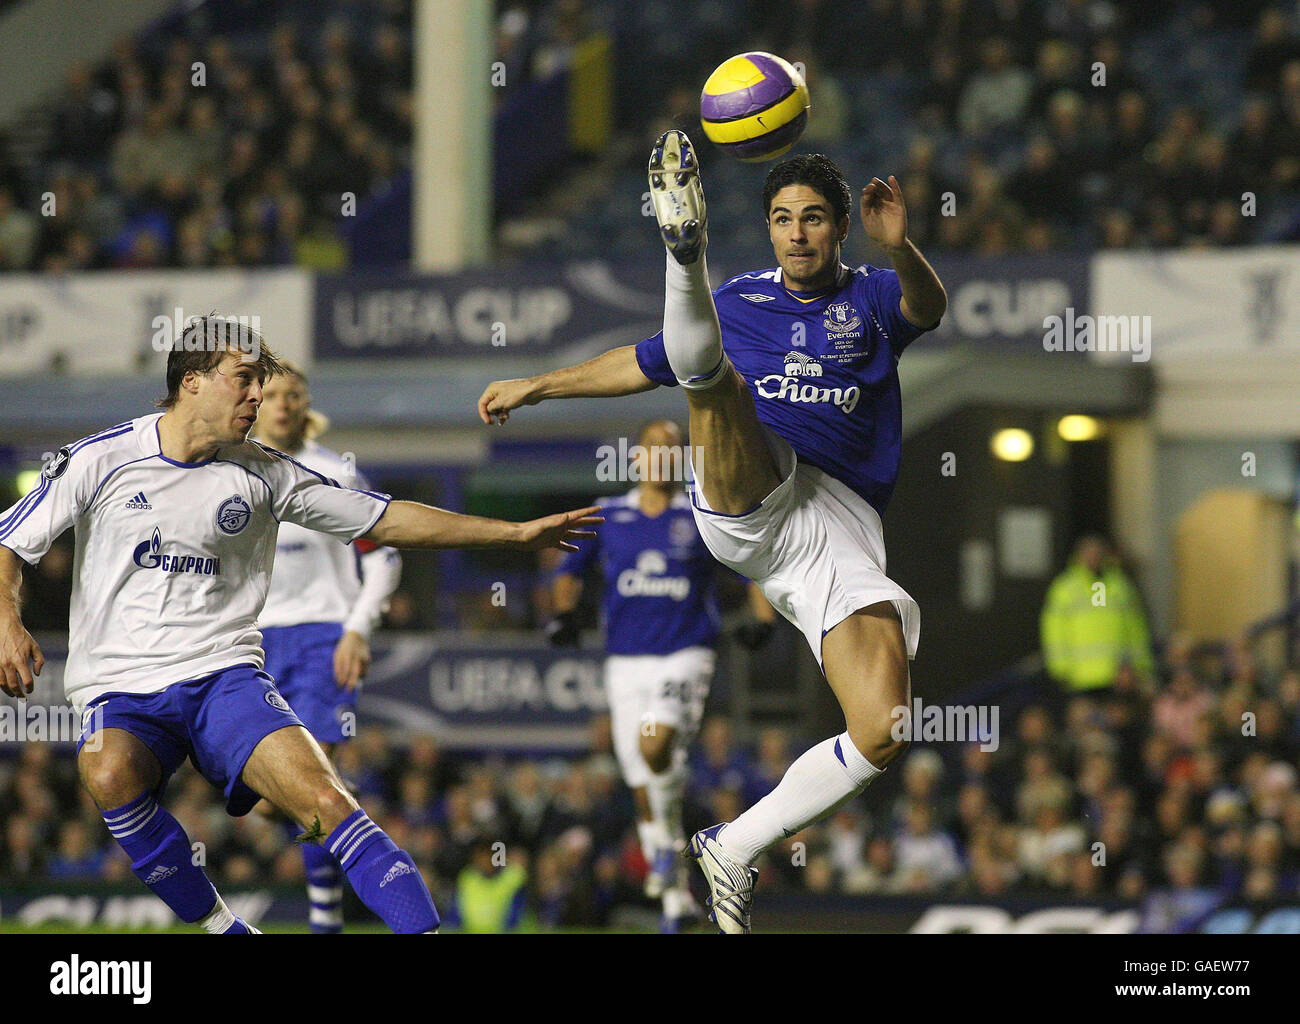 Everton's Mikel Arteta (right) battles with Zenit St Petersburg's Radek Sirl during the UEFA Cup match at Goodison Park, Liverpool. Stock Photo